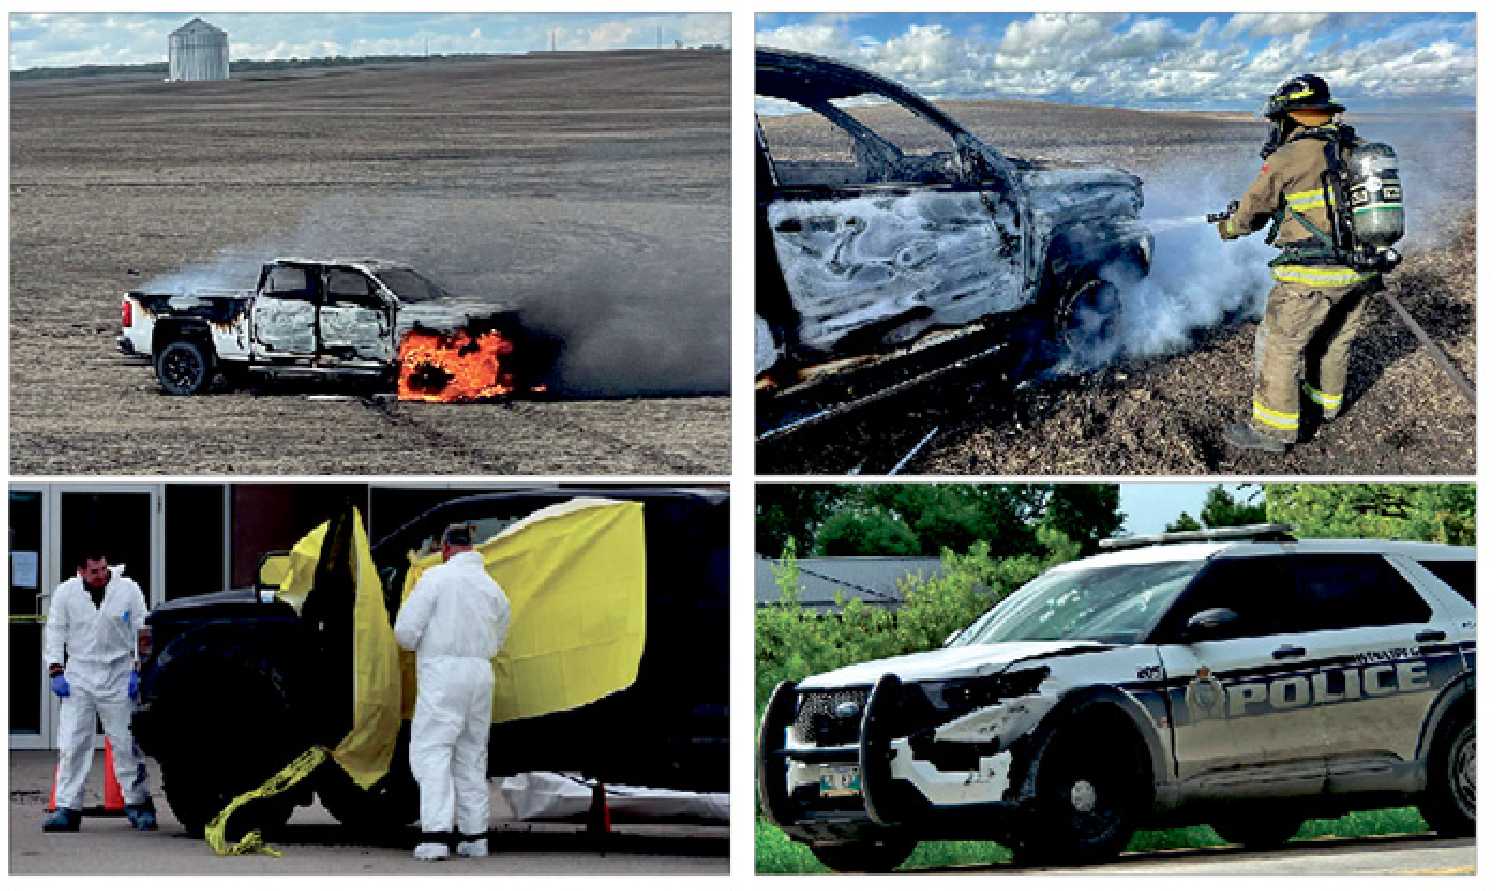 Car thieves left a trail of destruction across southeast Saskatchewan and southern Manitoba Tuesday and Wednesday. Top left an abandoned truck set on fire near Whitewood, top right Whitewood Fire Department fighting the blaze, lower left the vehicle in which one suspect was shot dead, below right, a shot up Winnipeg Police Service vehicle involved in the chase.